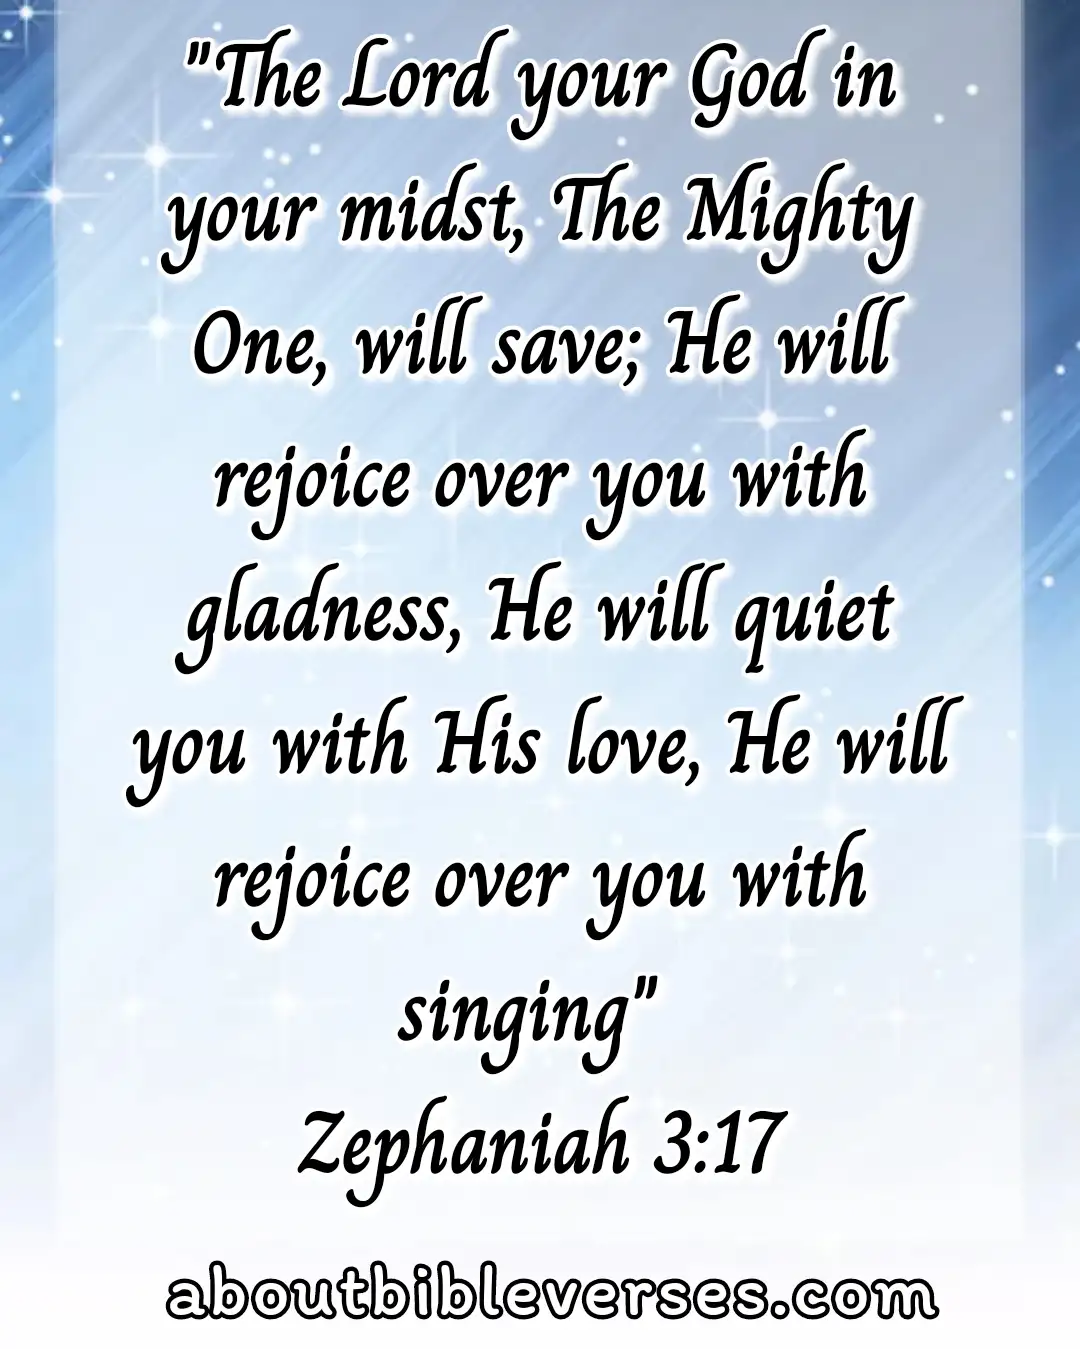 Bible verse about hope for the future (Zephaniah 3:17)